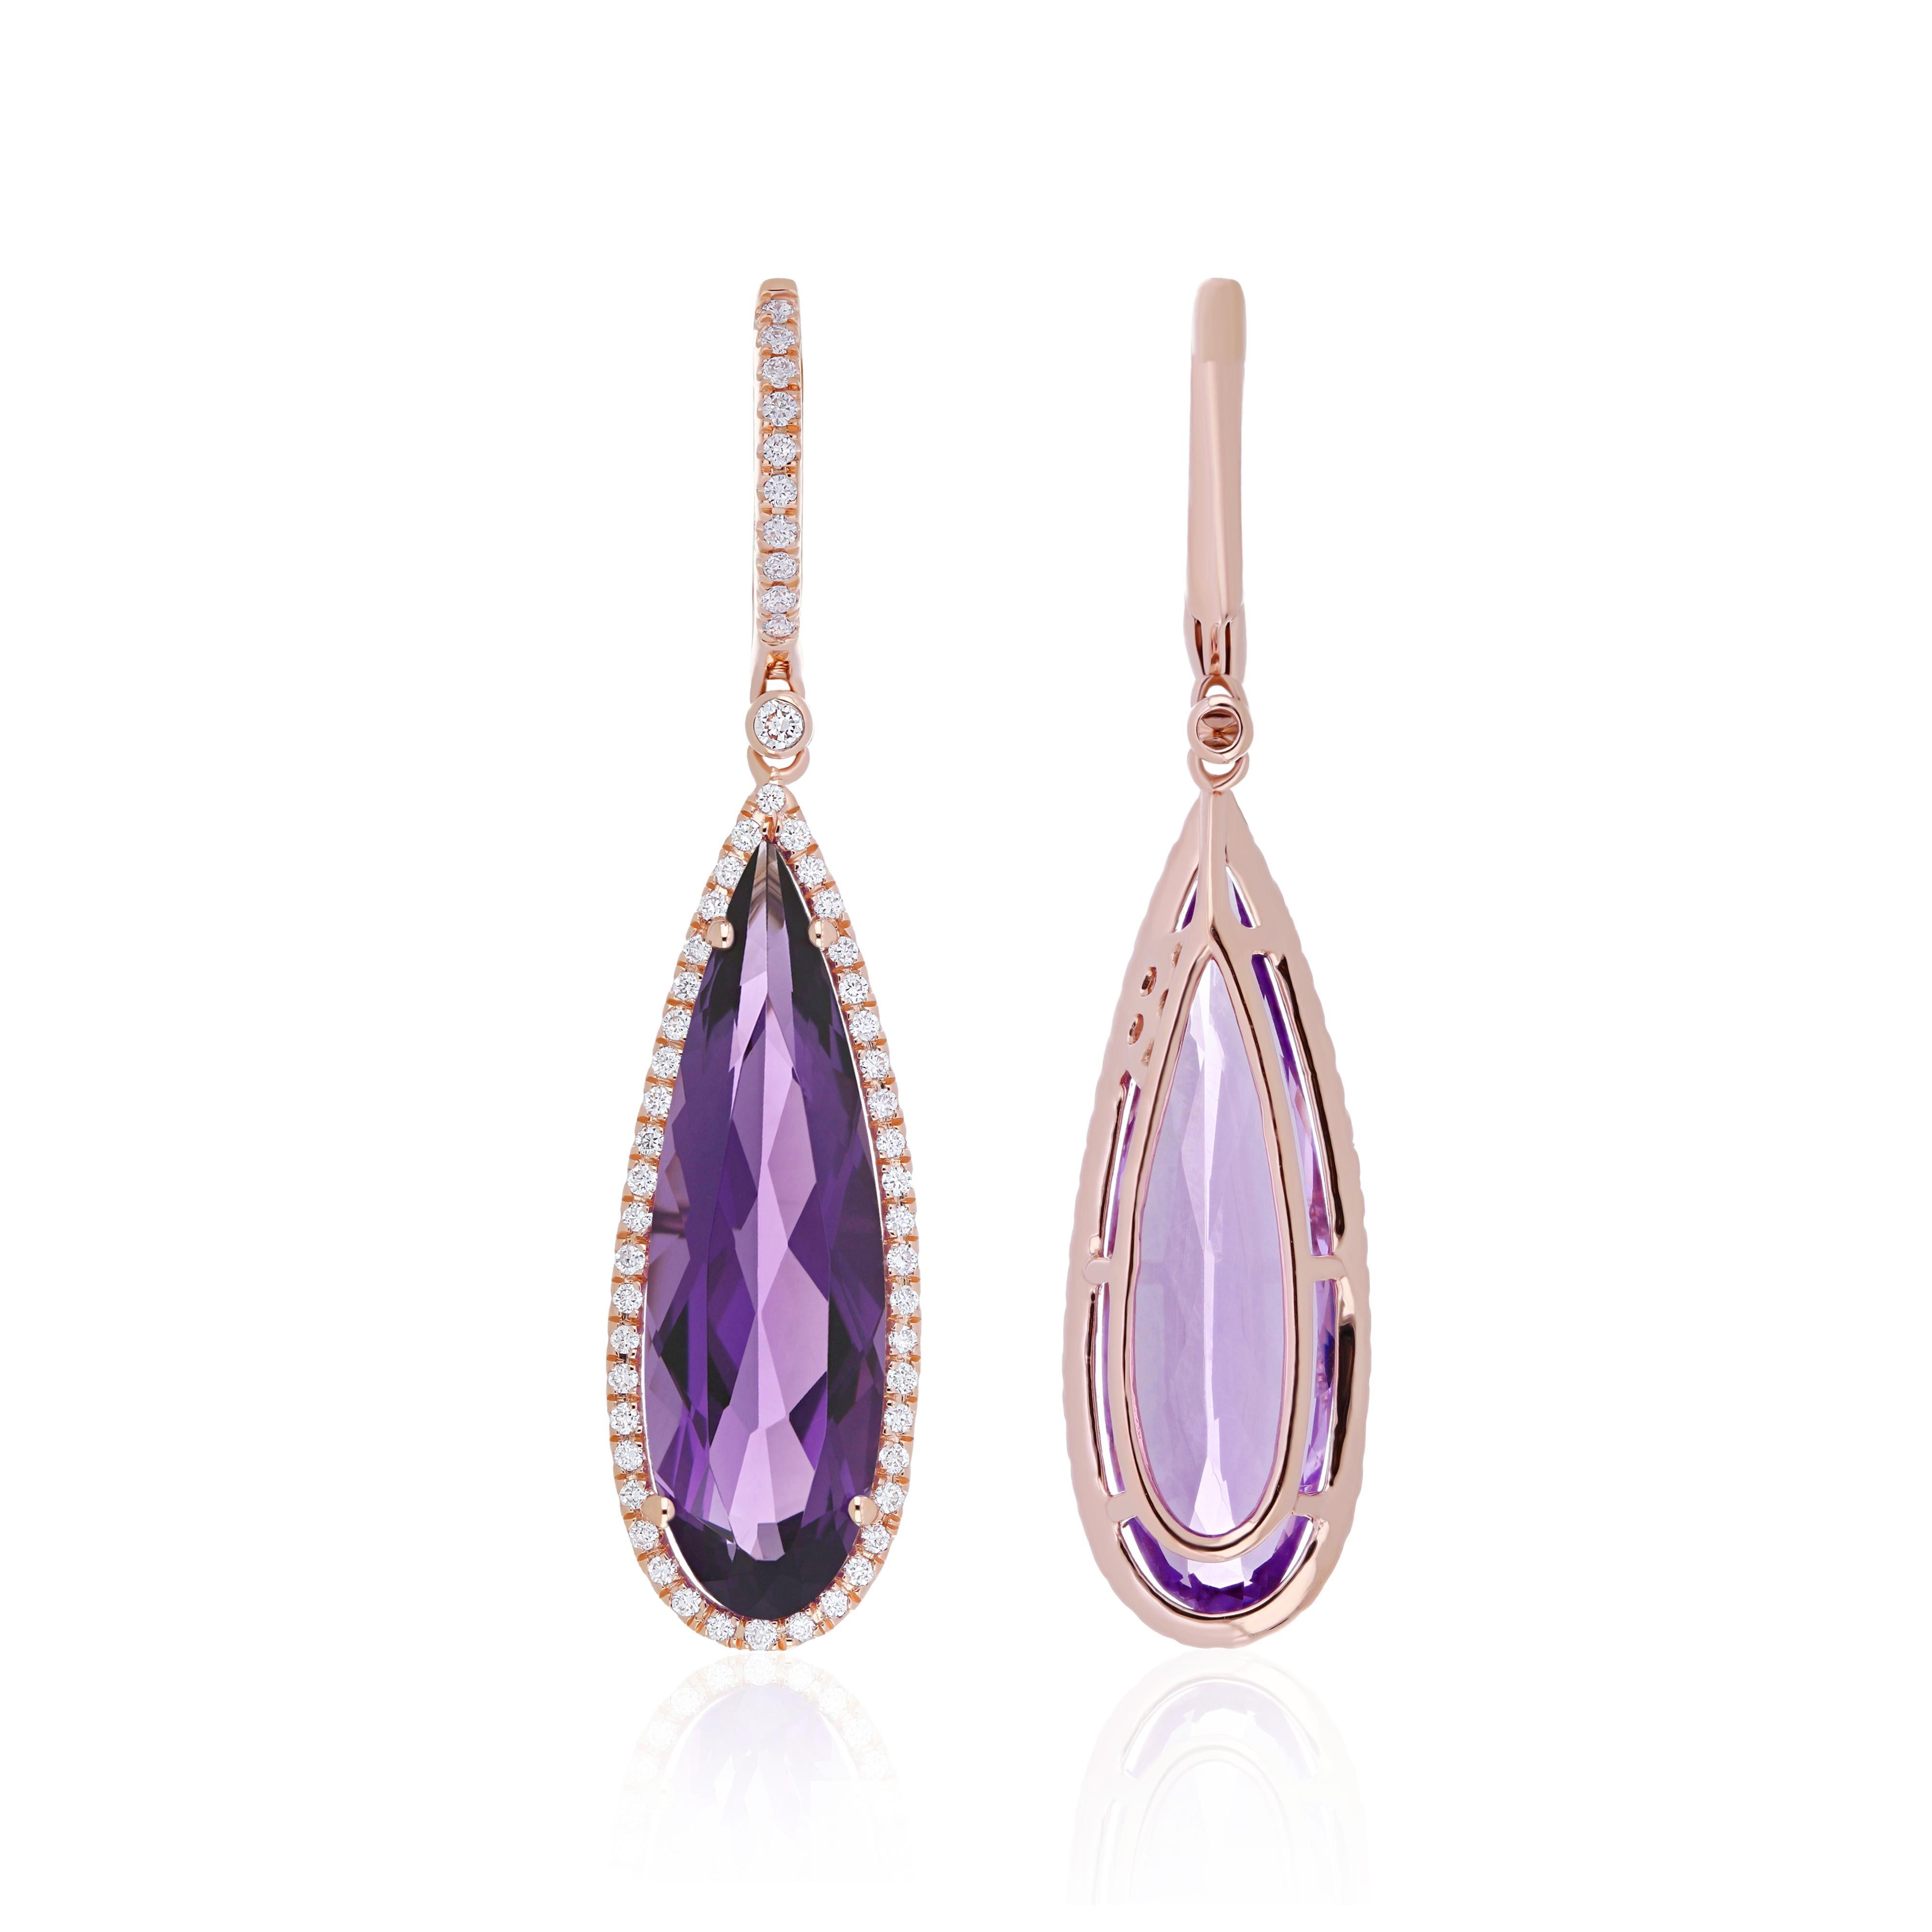 Pear Cut 10.41Cts Amethyst and Diamond Studded Earring in 14Karat, Rose Gold For Sale